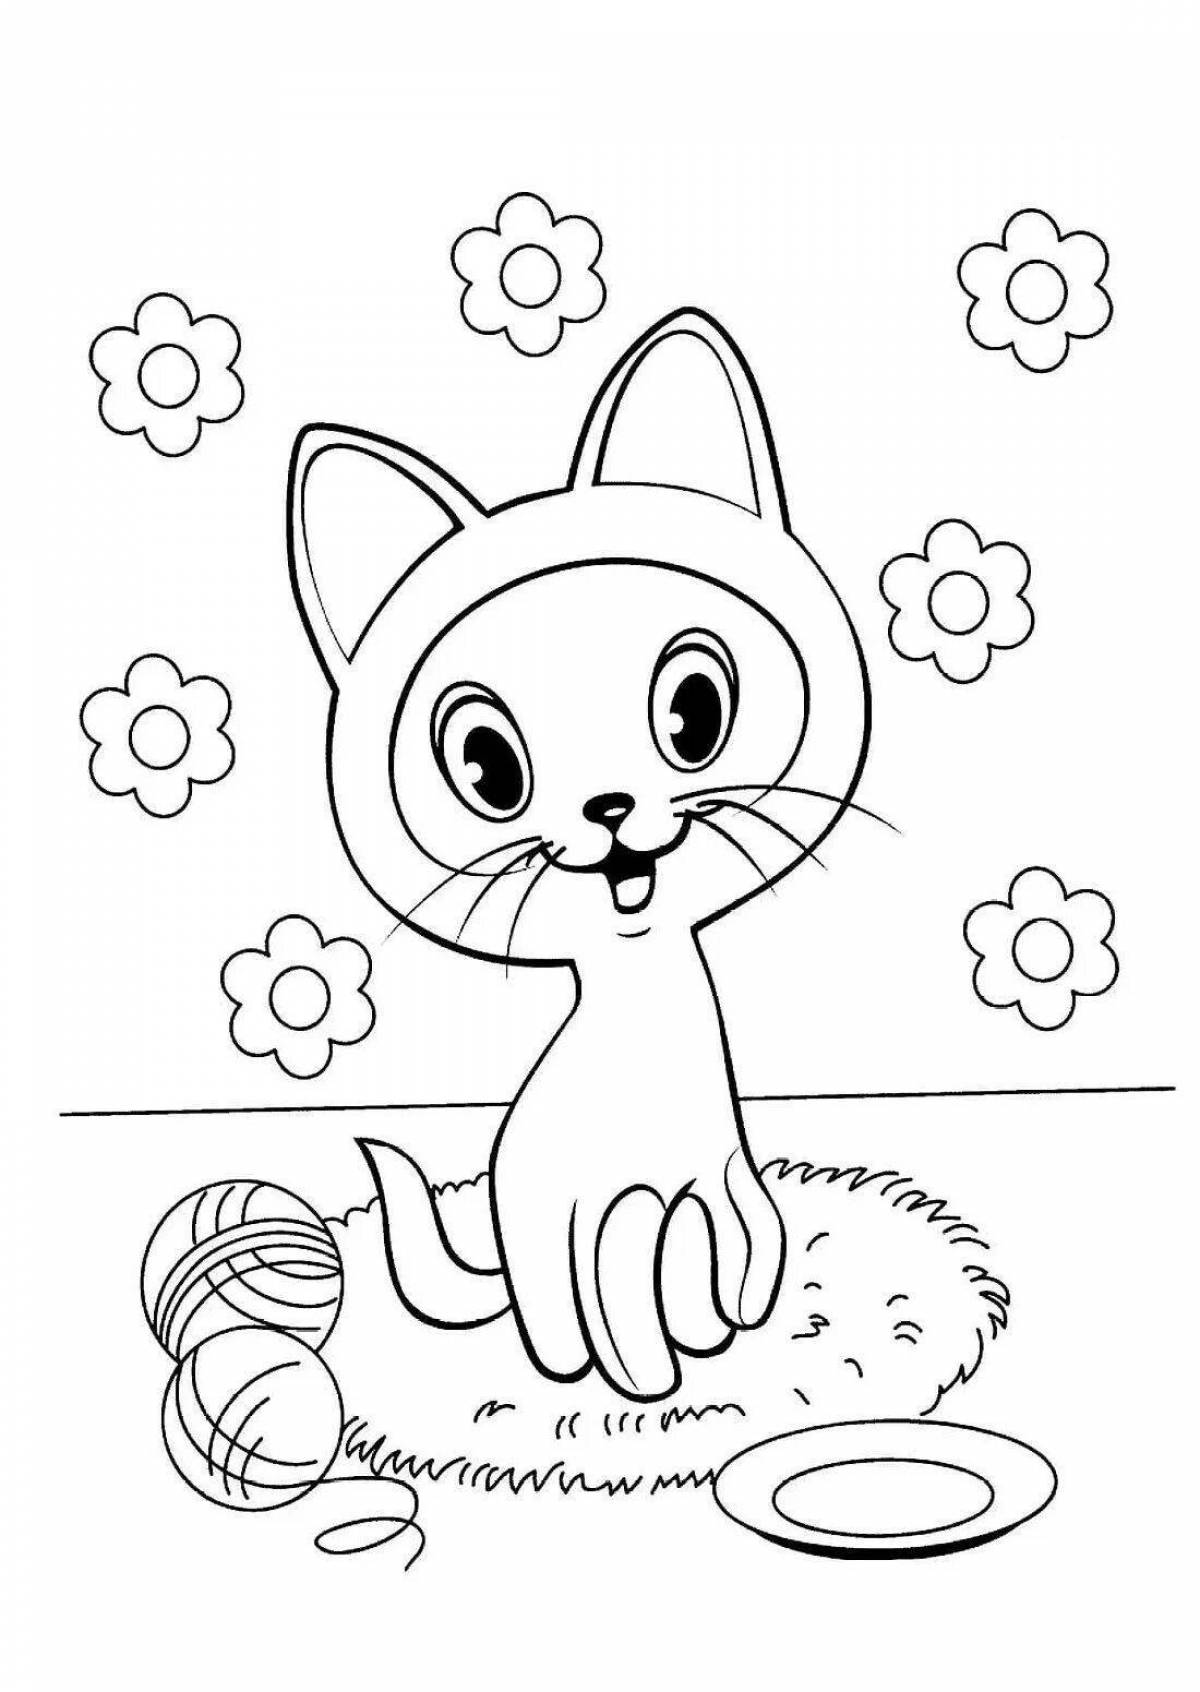 Animated cat coloring page